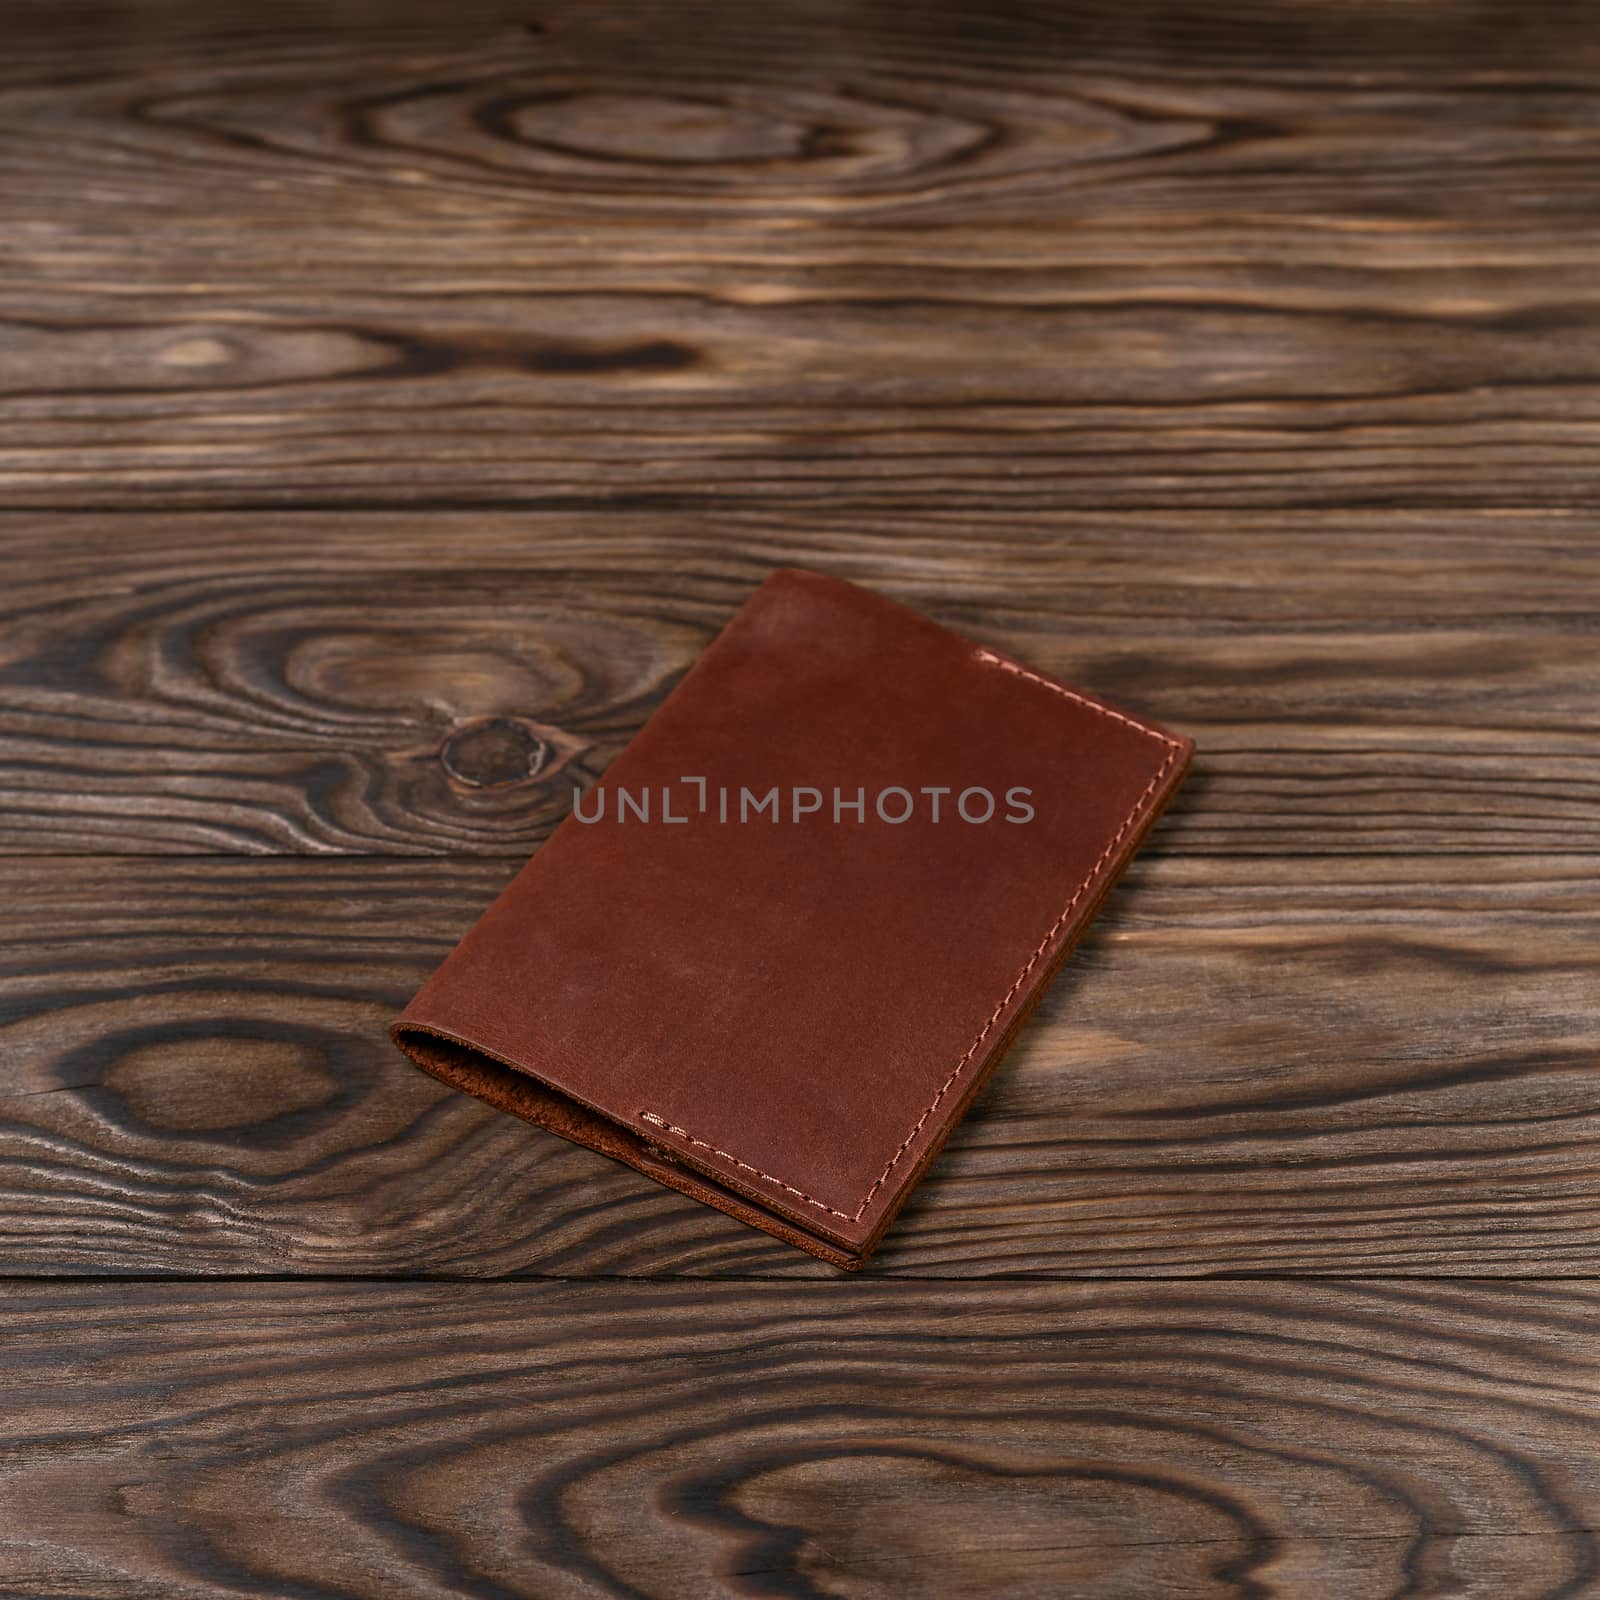 Ginger color handmade leather passport cover on wooden textured background. Businessman`s accessory.